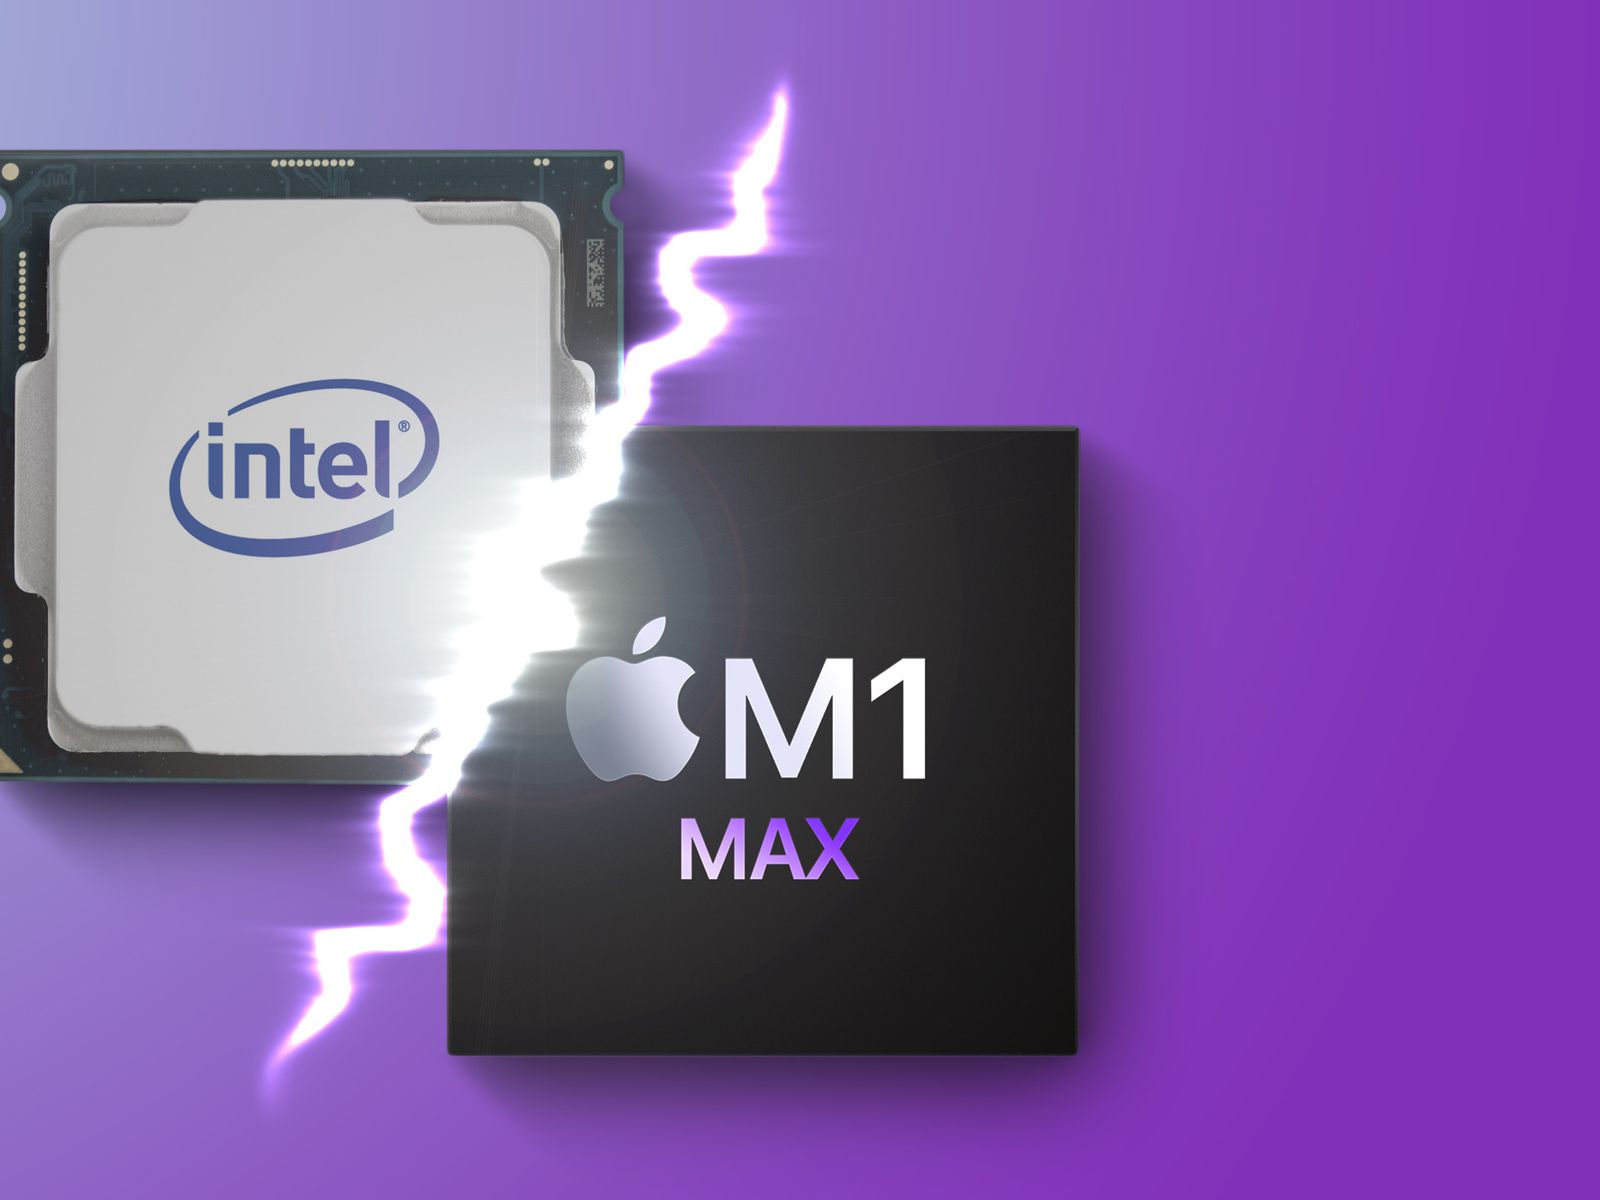 Benchmarks Confirm Intel S Latest Core I9 Chip Outperforms Apple S M1 Max With Several Caveats Macrumors